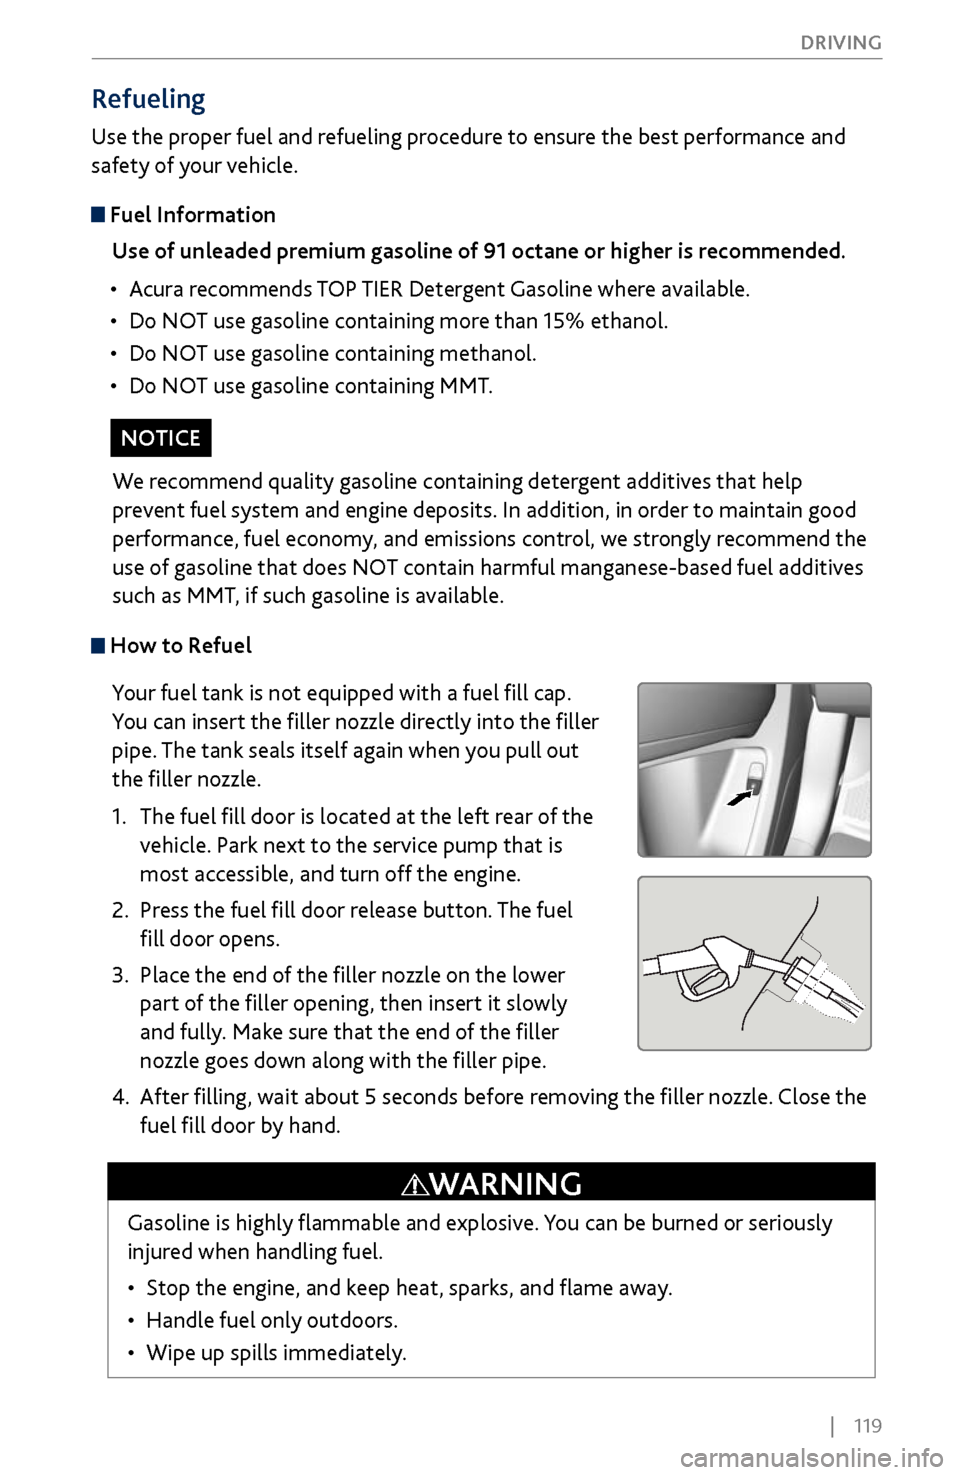 Acura MDX 2017  Owners Guide |    119
       DRIVING
 How to Refuel
Your fuel tank is not equipped with a fuel fill cap. 
You can insert the filler nozzle directly into the filler 
pipe. The tank seals itself again when you pull 